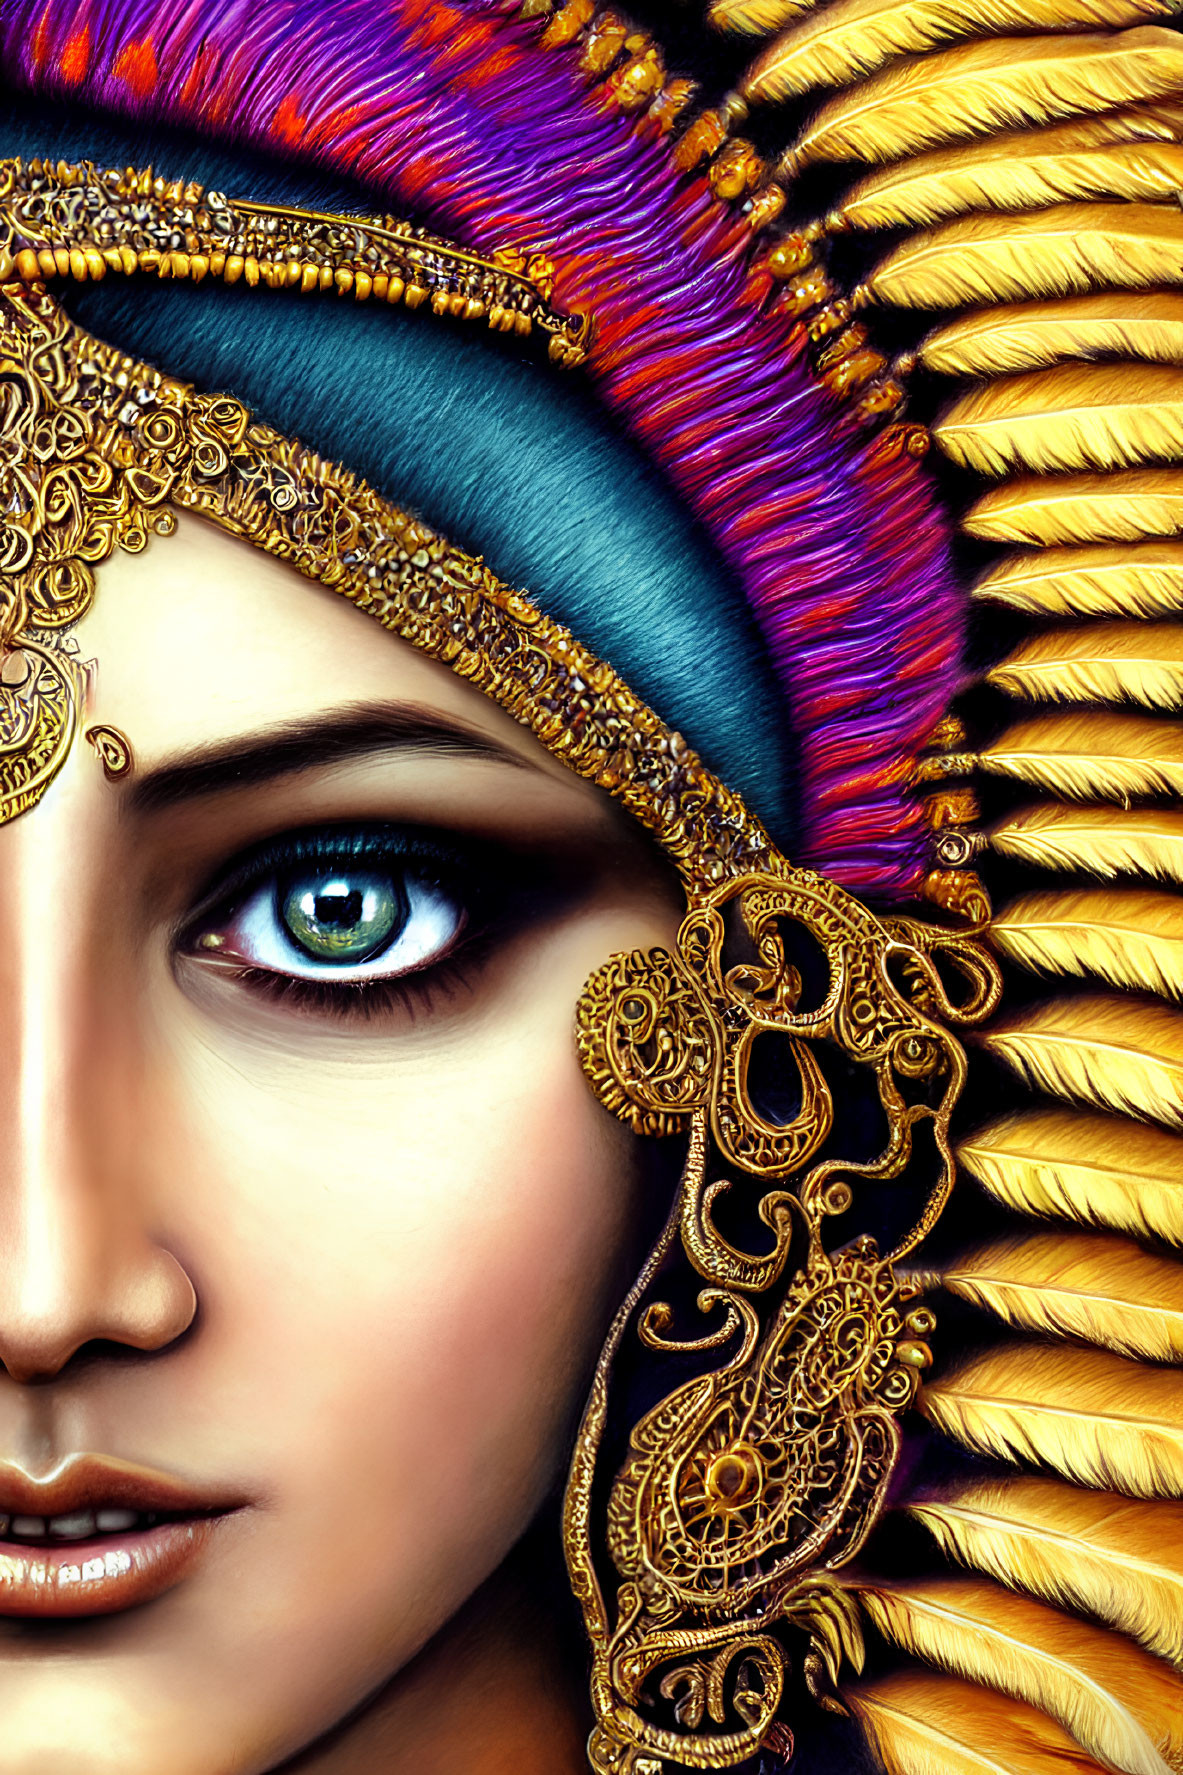 Detailed digital artwork of woman with blue eyes and ornate headpiece